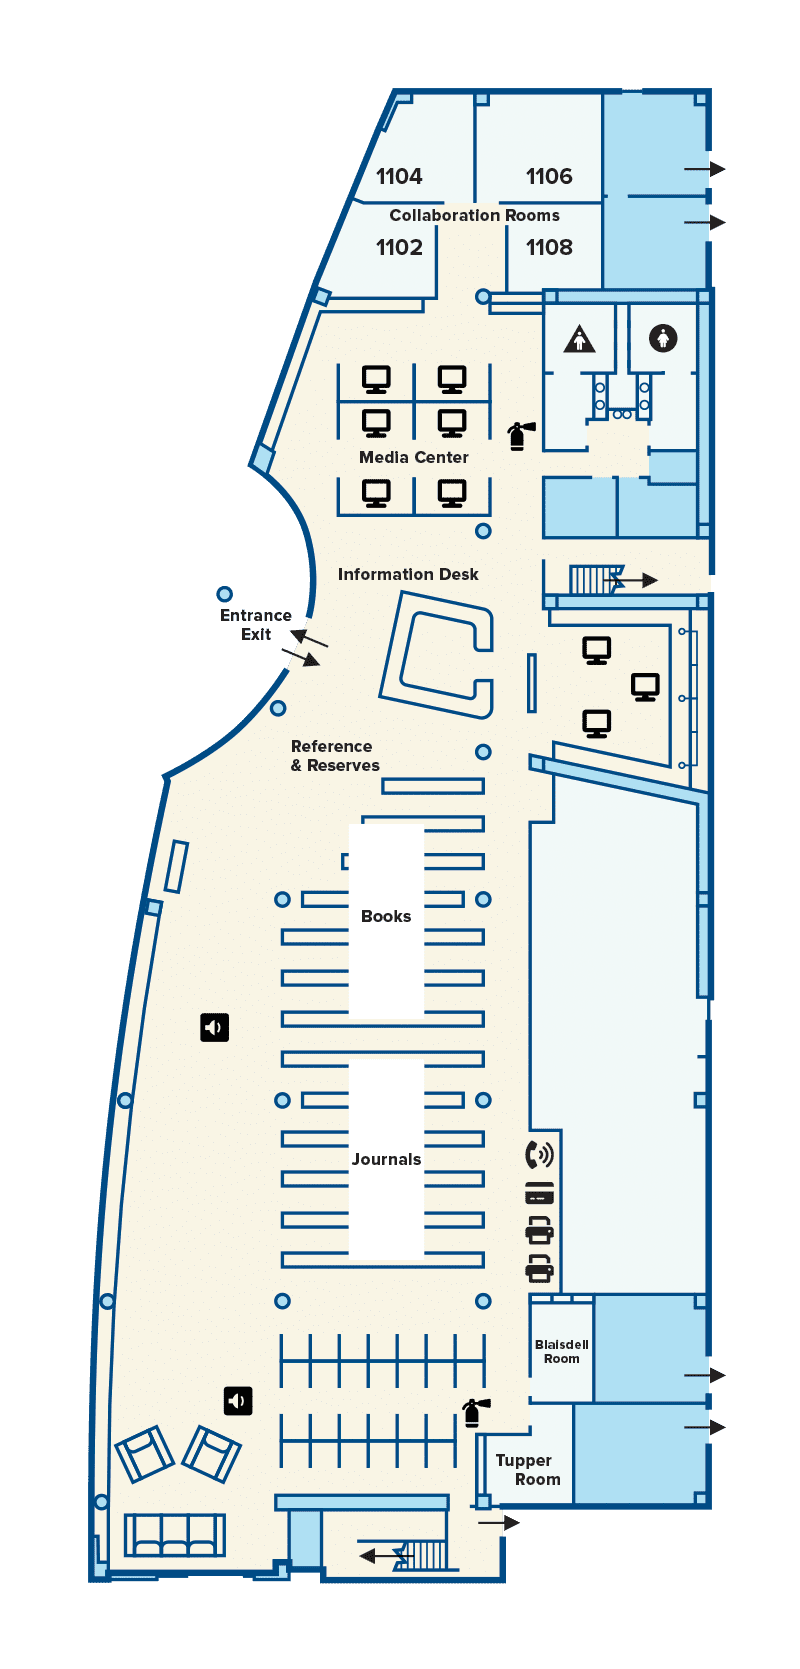 Floor map of Blaisdell Medical Library